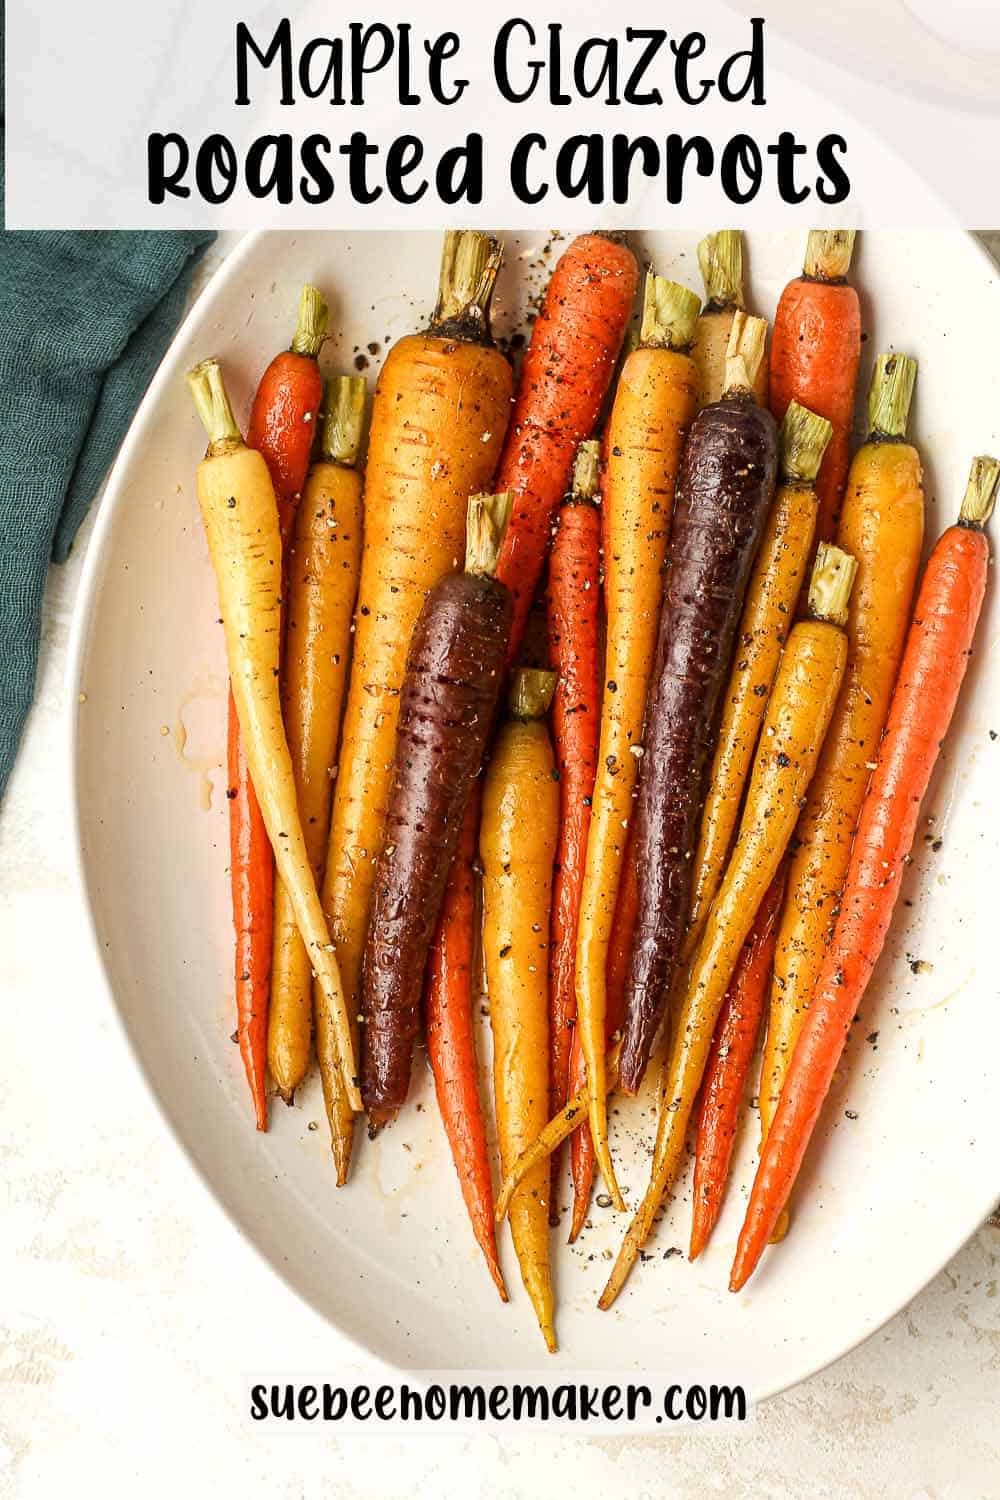 An oblong serving dish of maple glazed roasted carrots.